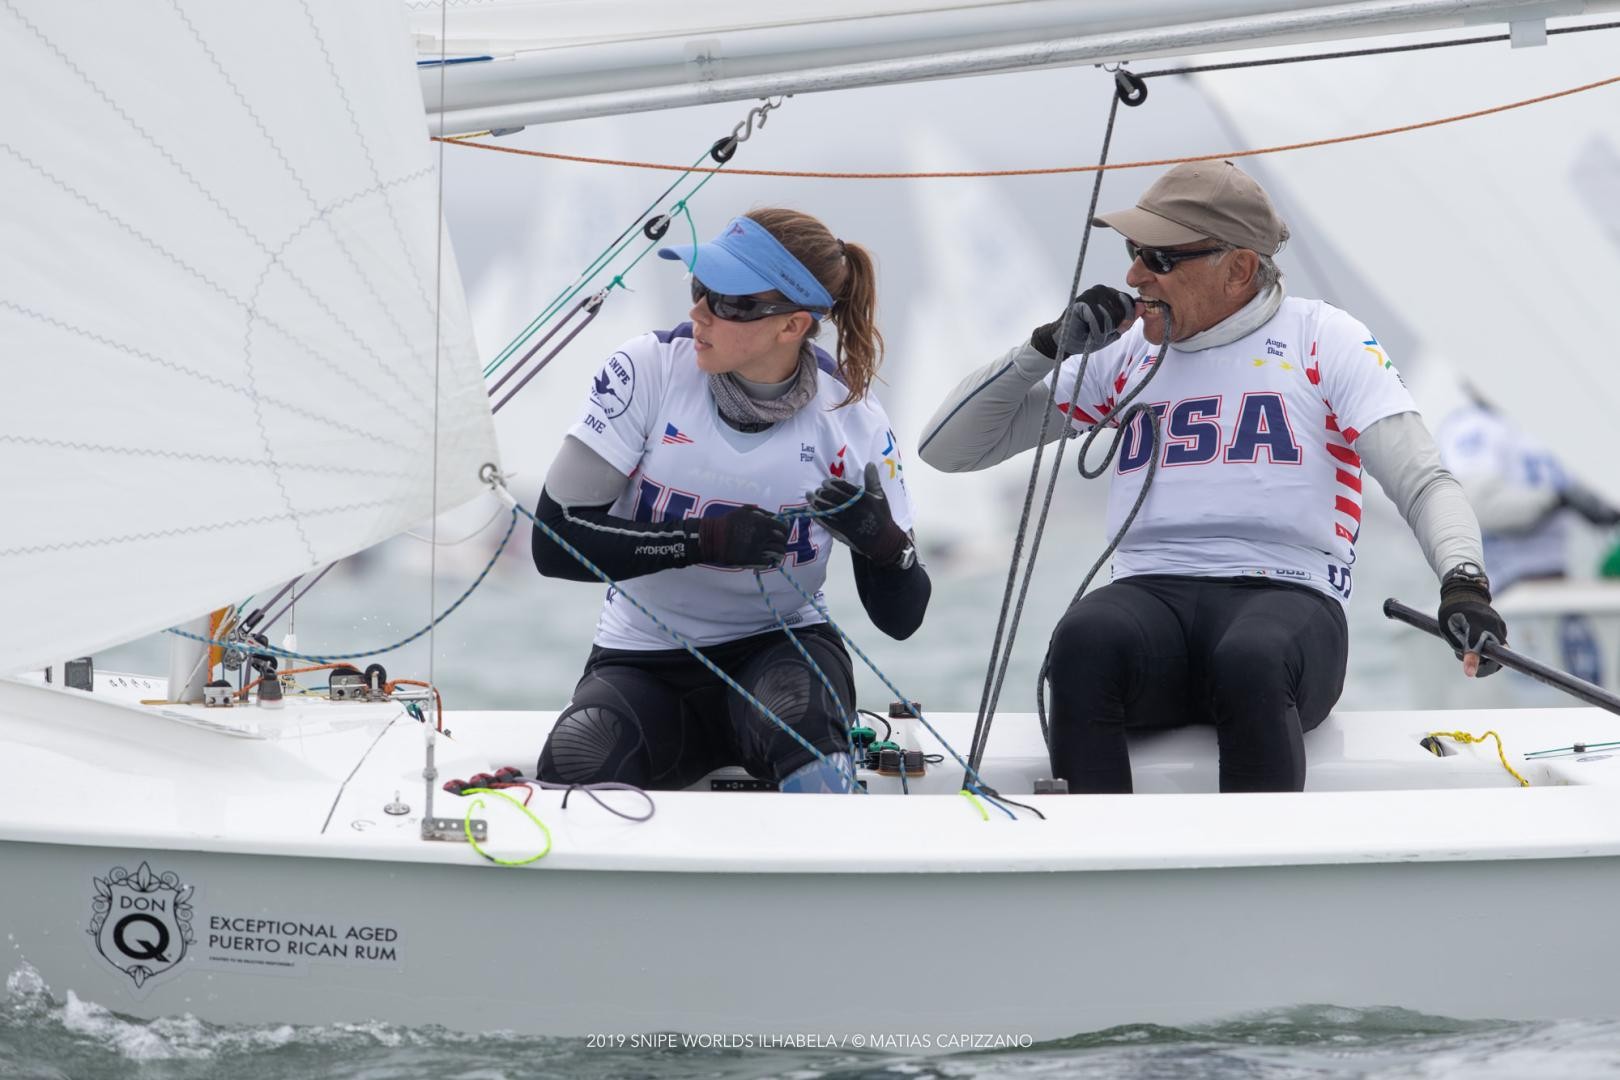 Only one race on day one of the 2019 Snipe World Championship 